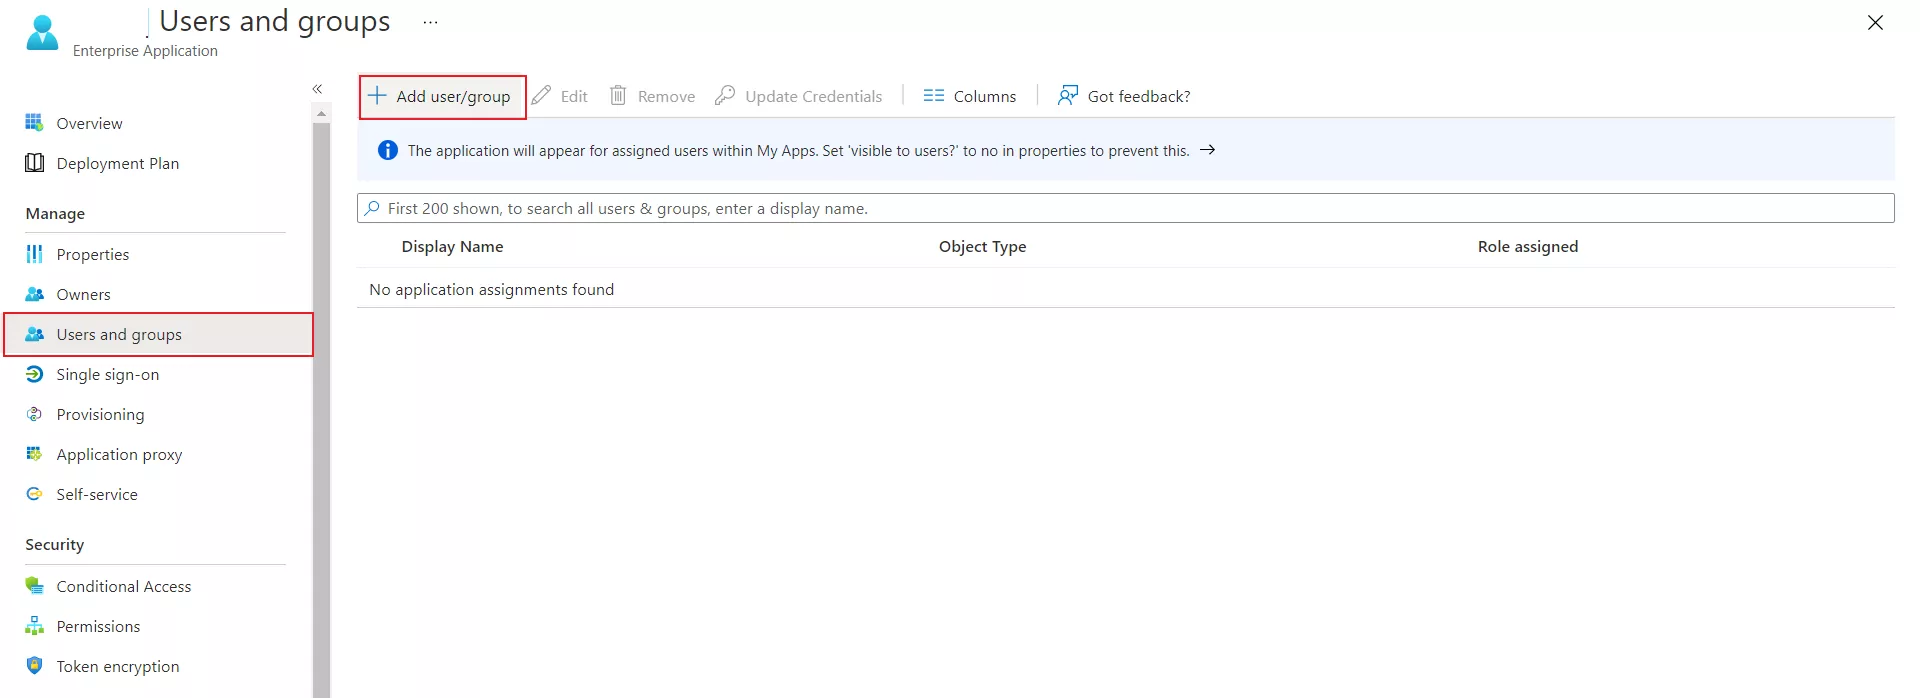 nopCommerce Single Sign-On (SSO) using Azure AD as IDP - assign groups and users